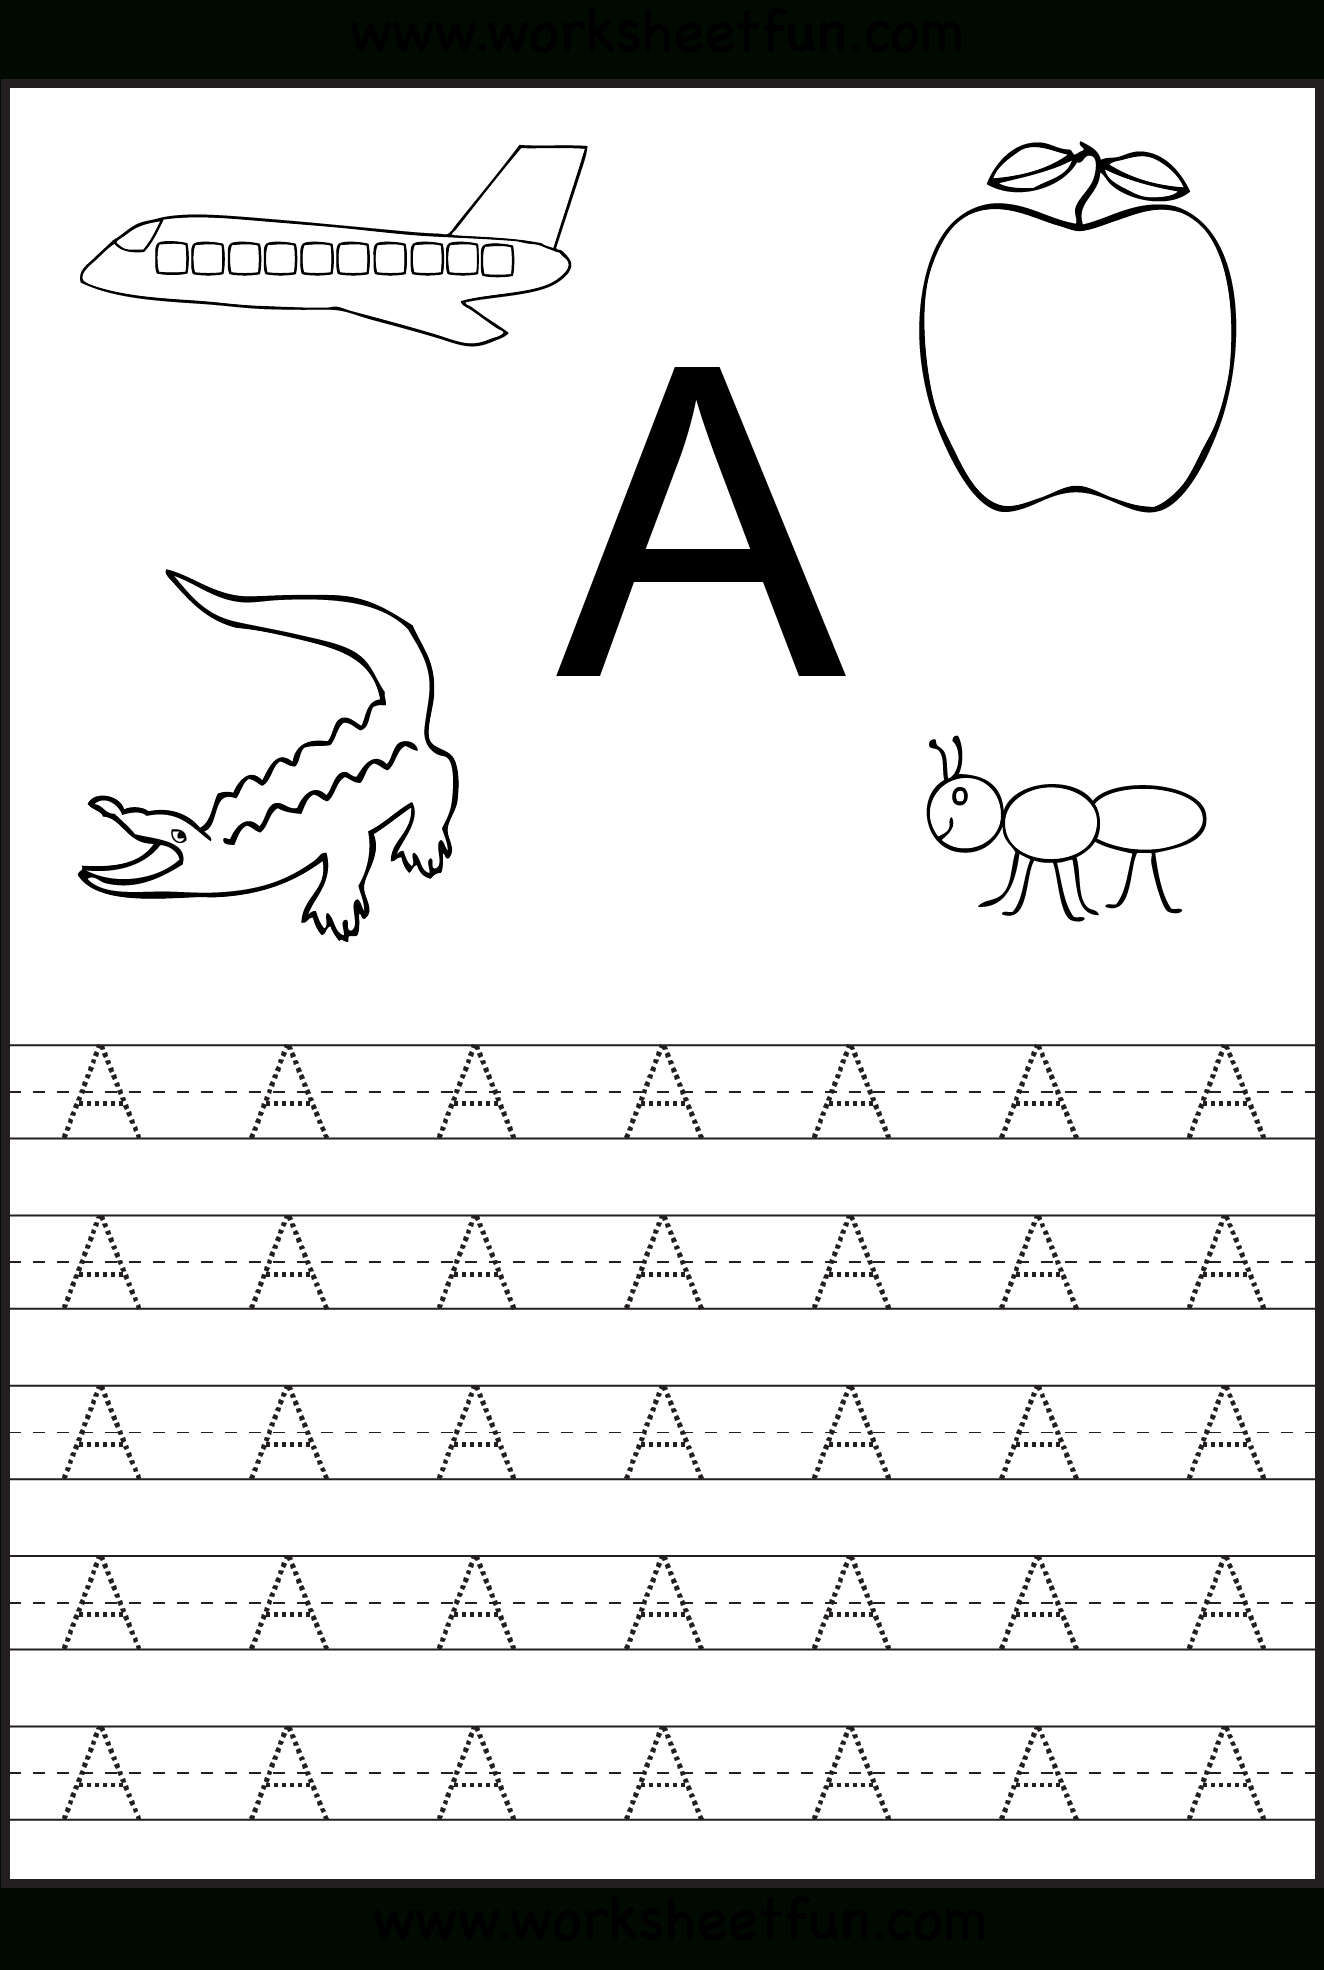 Free Printable Worksheets: Letter Tracing Worksheets For within Tracing The Letters Worksheets